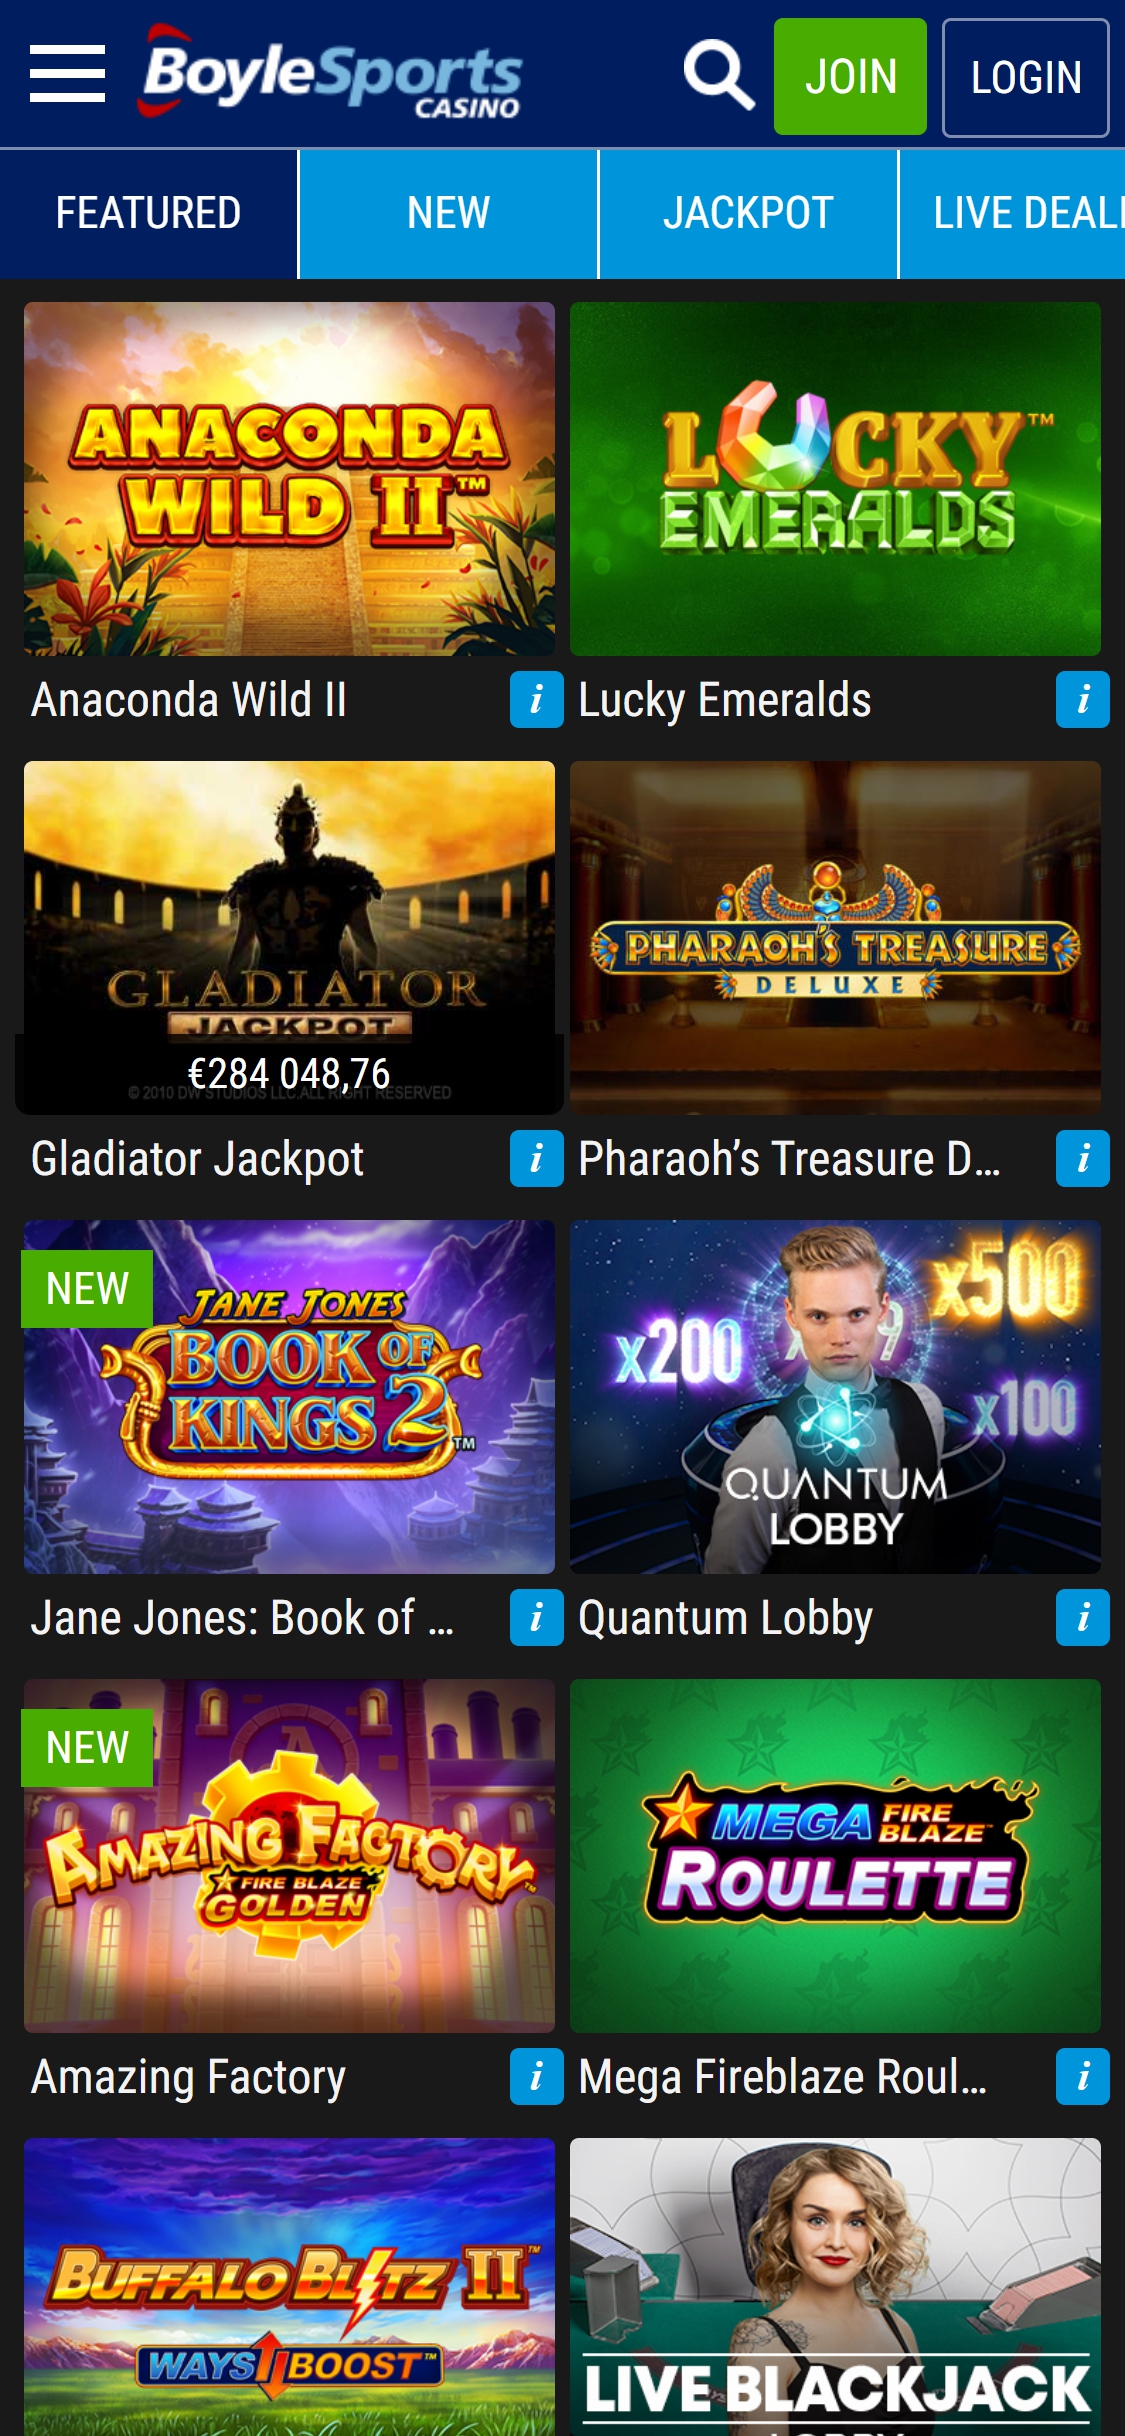 Boyle Sports Casino Mobile Games Review